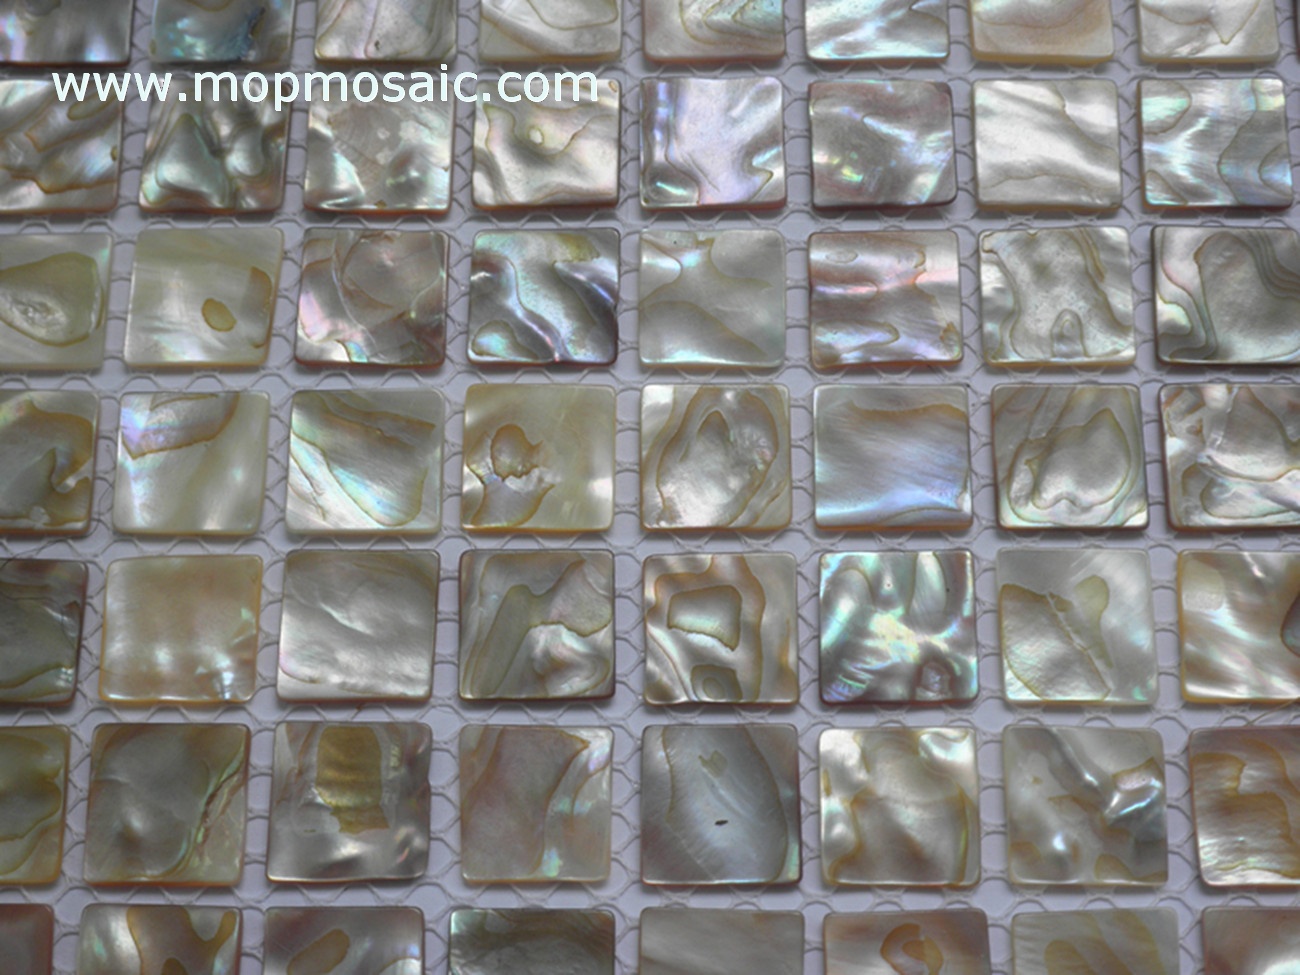 Mother of pearl mosaic(Rianbow dapple shell mosaic)